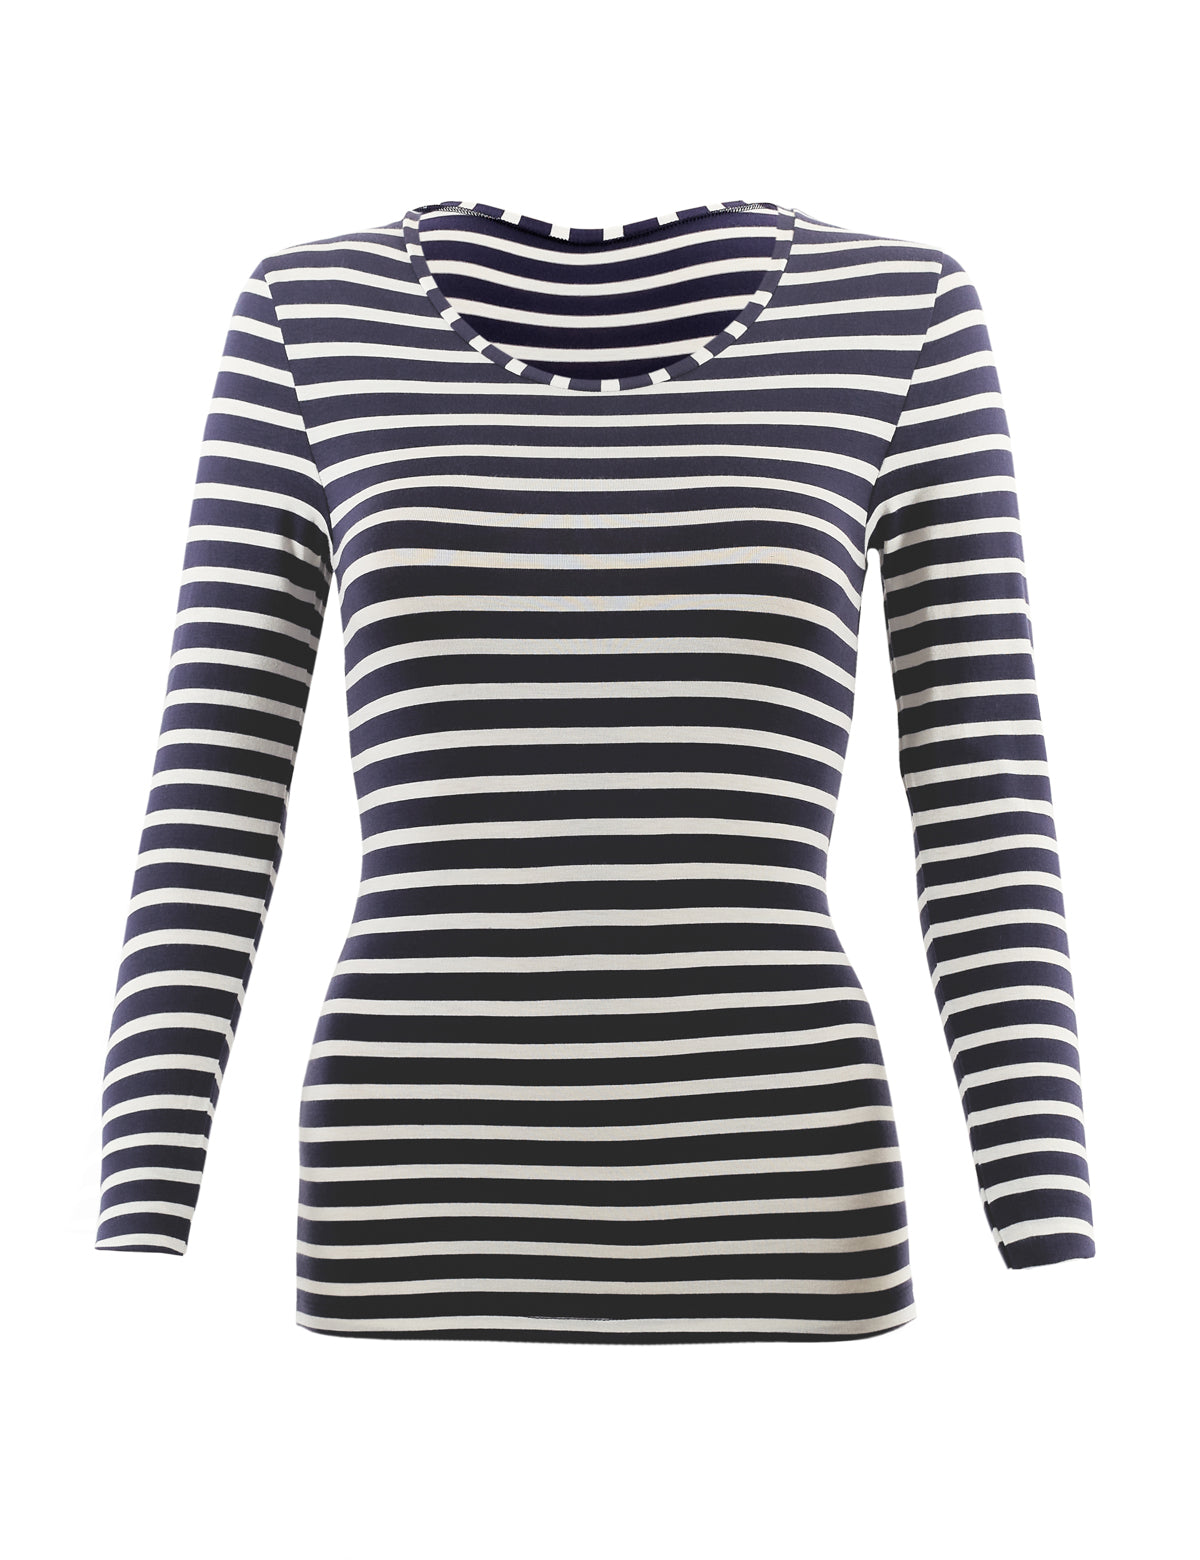 Heatgen Thermal Long Sleeve Striped Top Marks & Spencer Philippines